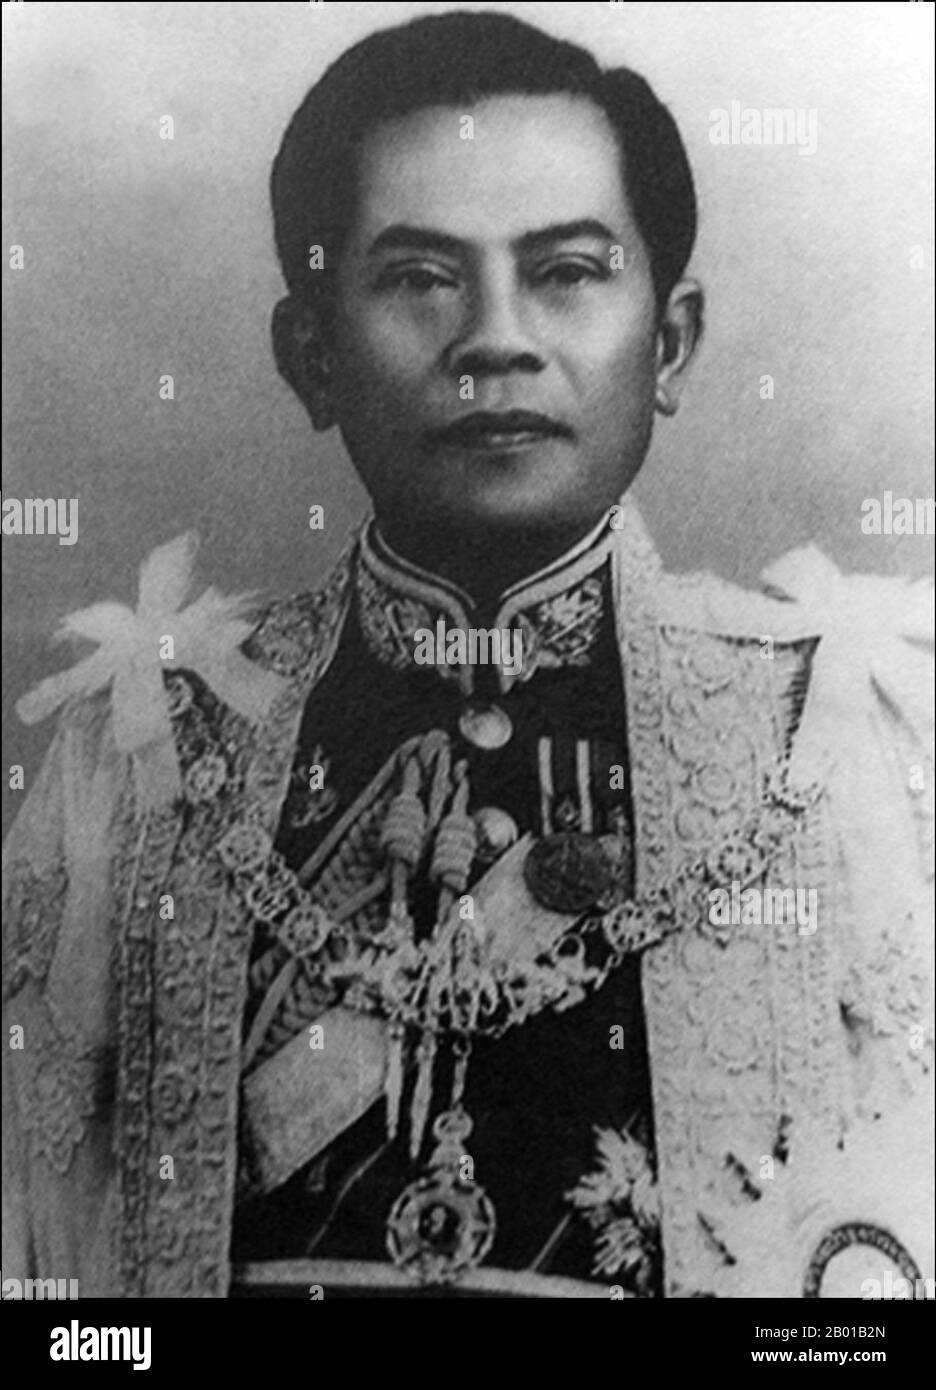 Thailand: General Kriangsak Chomanan (17 December 1917 - 23 December 2003), 15th Prime Minister of Thailand (r. 1977-1980), c. 1960s.  Kriangsak Chomanan served as Prime Minister from 1977 to 1980. A professional soldier, Kriangsak fought against the communists in both the Korean War and the Vietnam War. In 1977, as the Supreme Commander of the army, he staged a successful coup against Prime Minister Tanin Kraivixien.  Kriangsak is widely credited for defusing a long-running Communist insurgency in northern Thailand. His refoulement of Cambodian refugees led to over 3,000 recorded deaths. Stock Photo